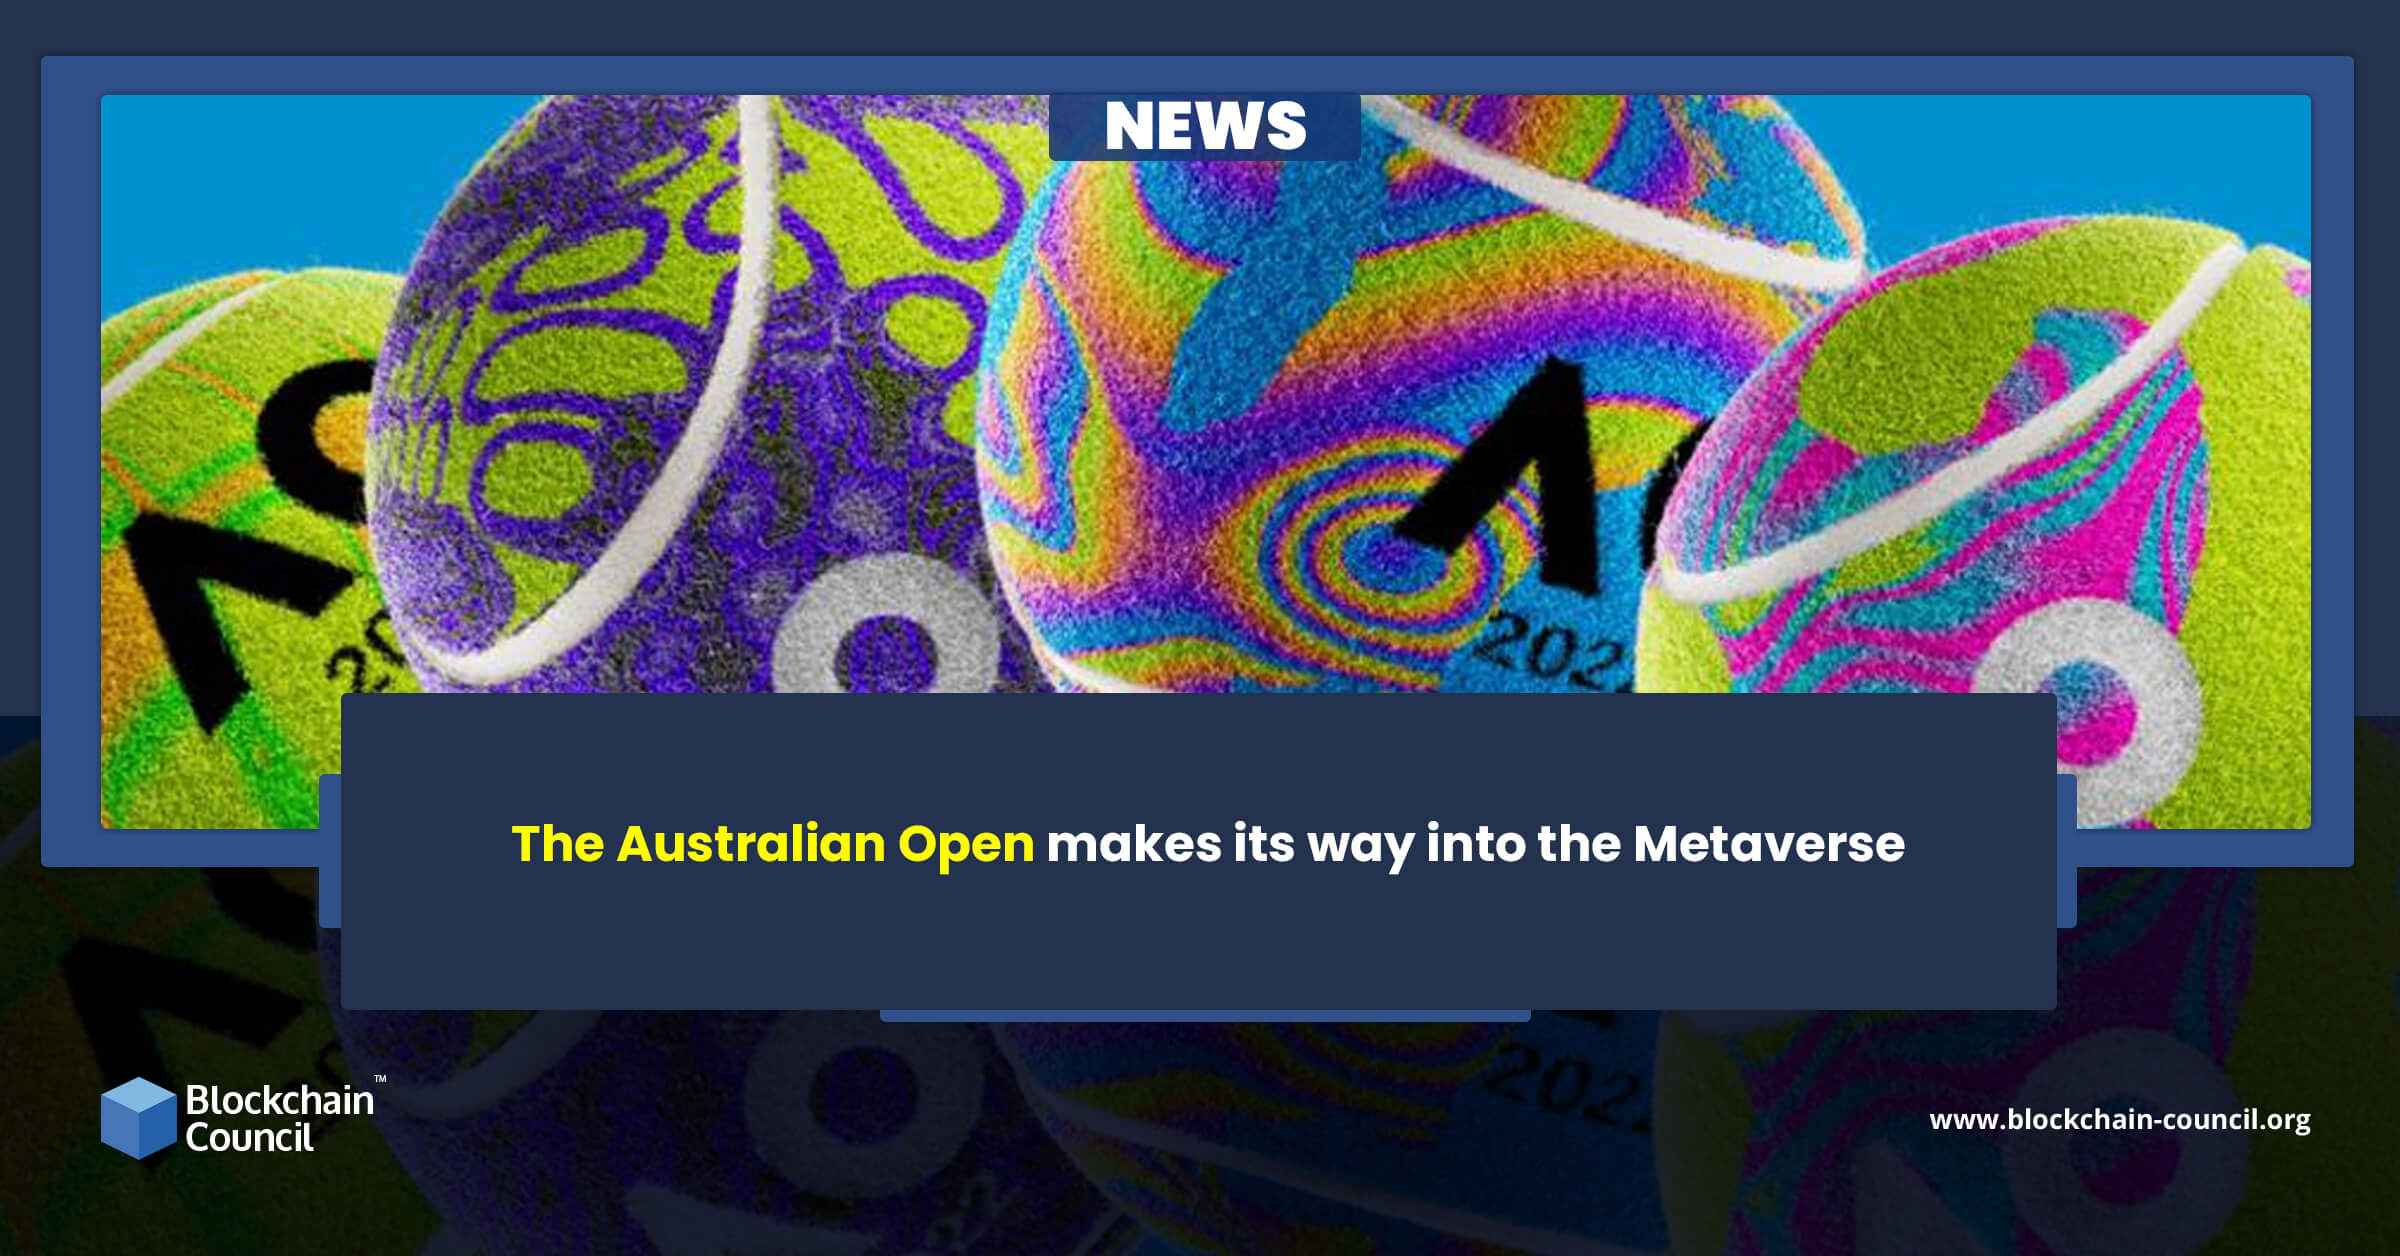 The Australian Open makes its way into the Metaverse